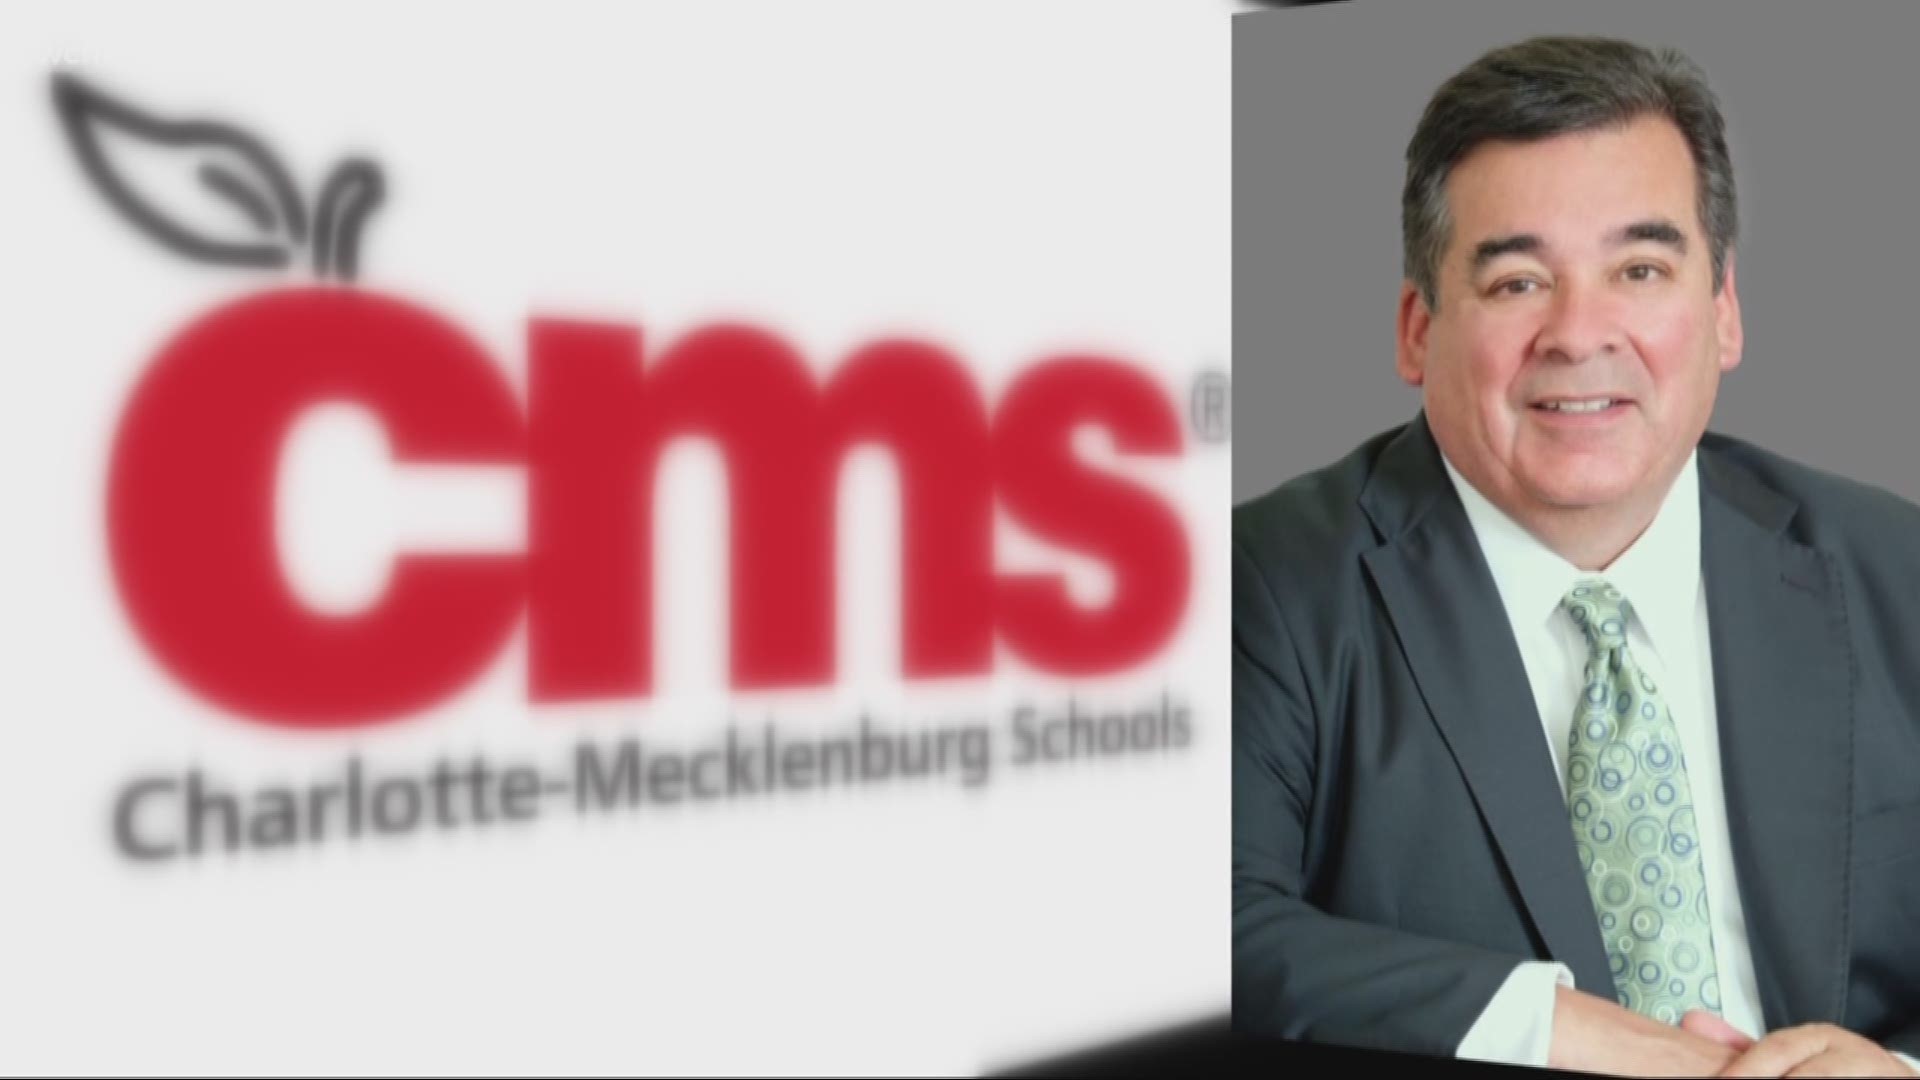 The CMS Board of Education will meet at 6 p.m. on Tuesday night for the first time since unanimously voting in favor of a separation agreement with Wilcox Friday.